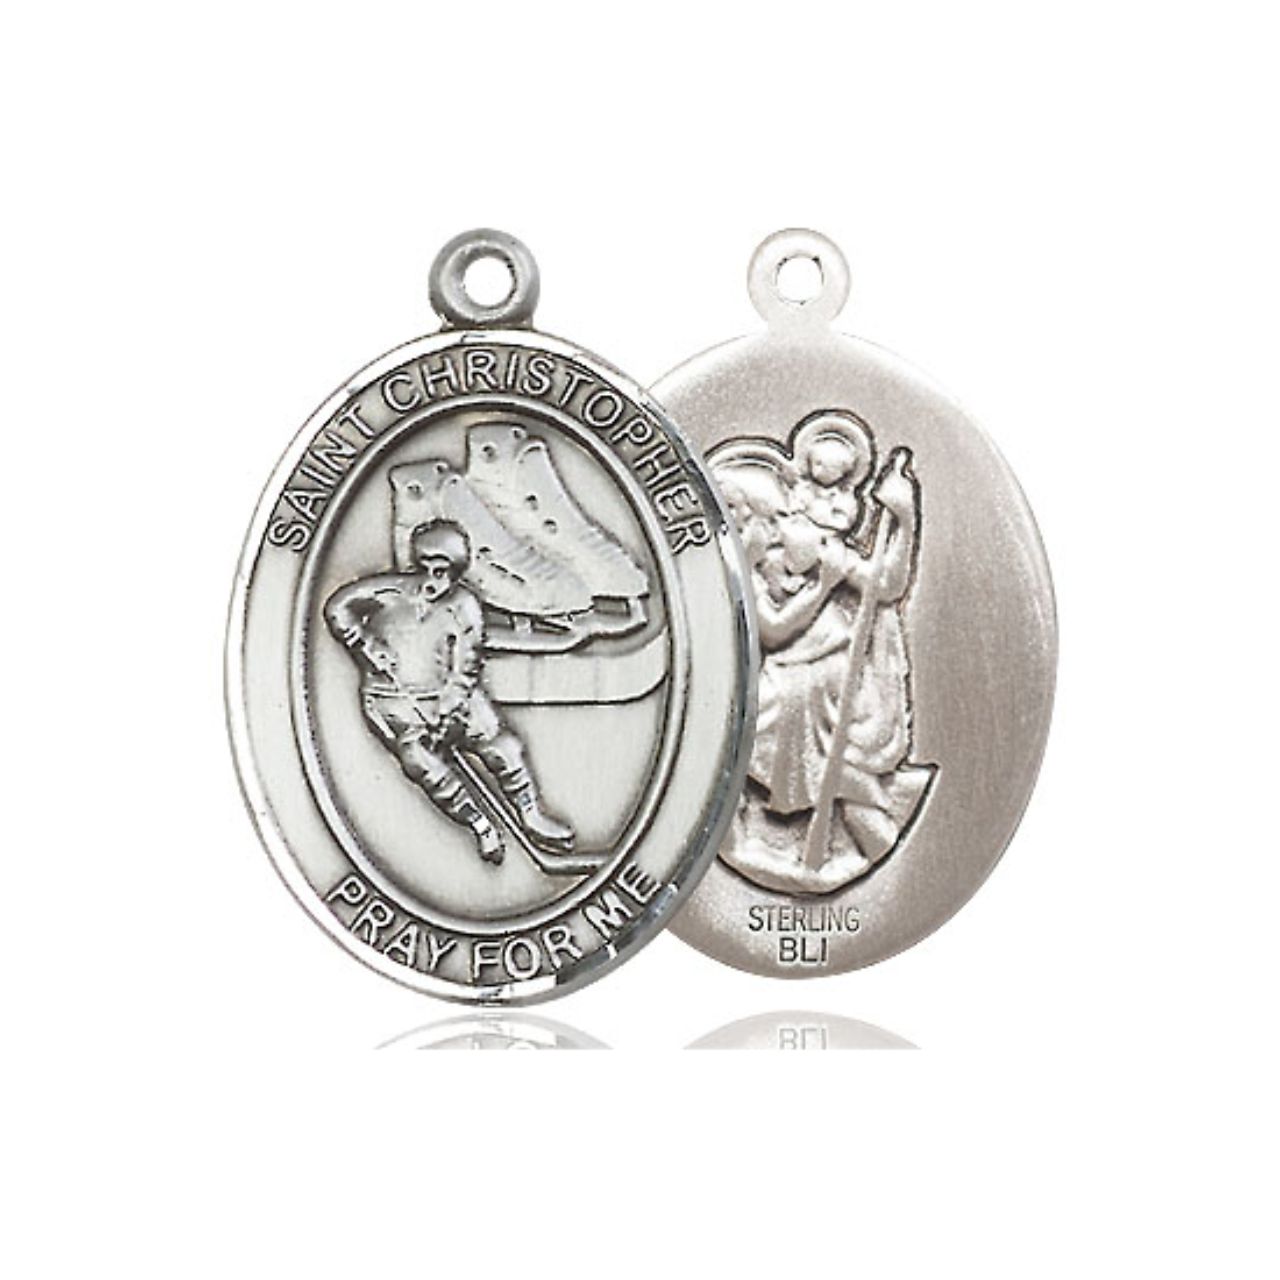 St. Christopher Hockey Medal - Sterling Silver Oval Pendant (2 Sizes)